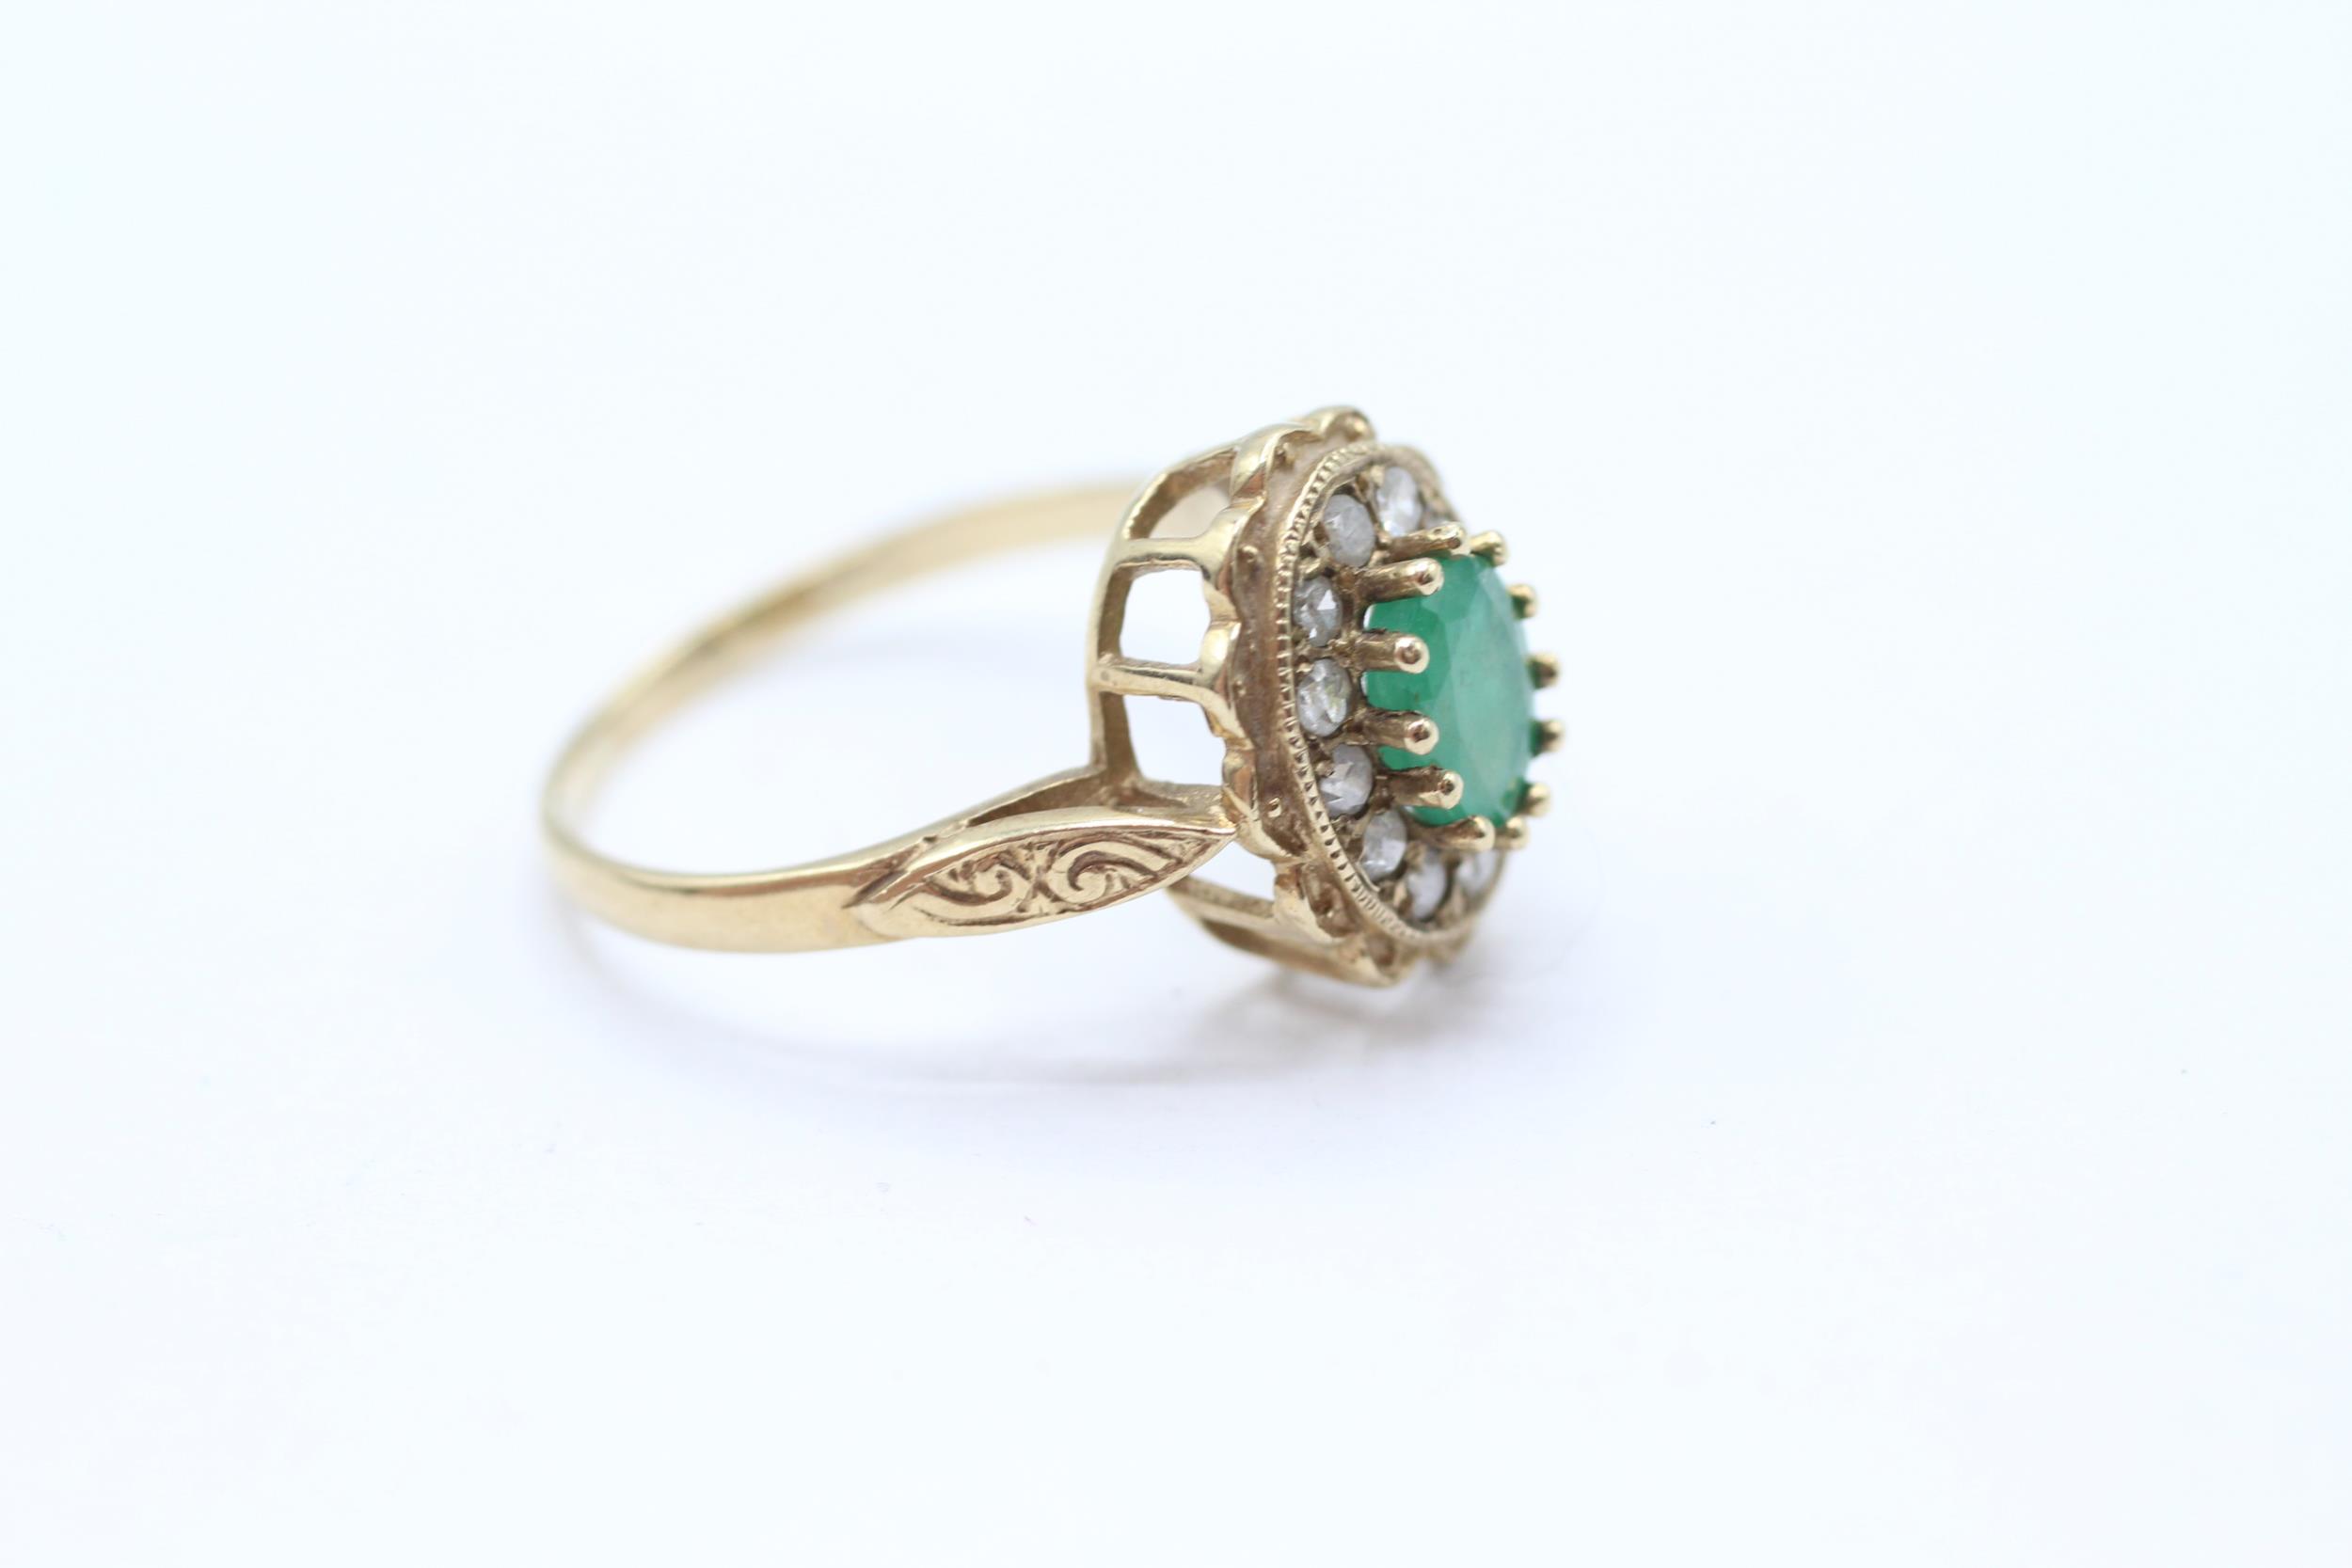 9ct gold vintage emerald & diamond cluster ring with patterned shoulders Size M - 2.3 g - Image 2 of 4